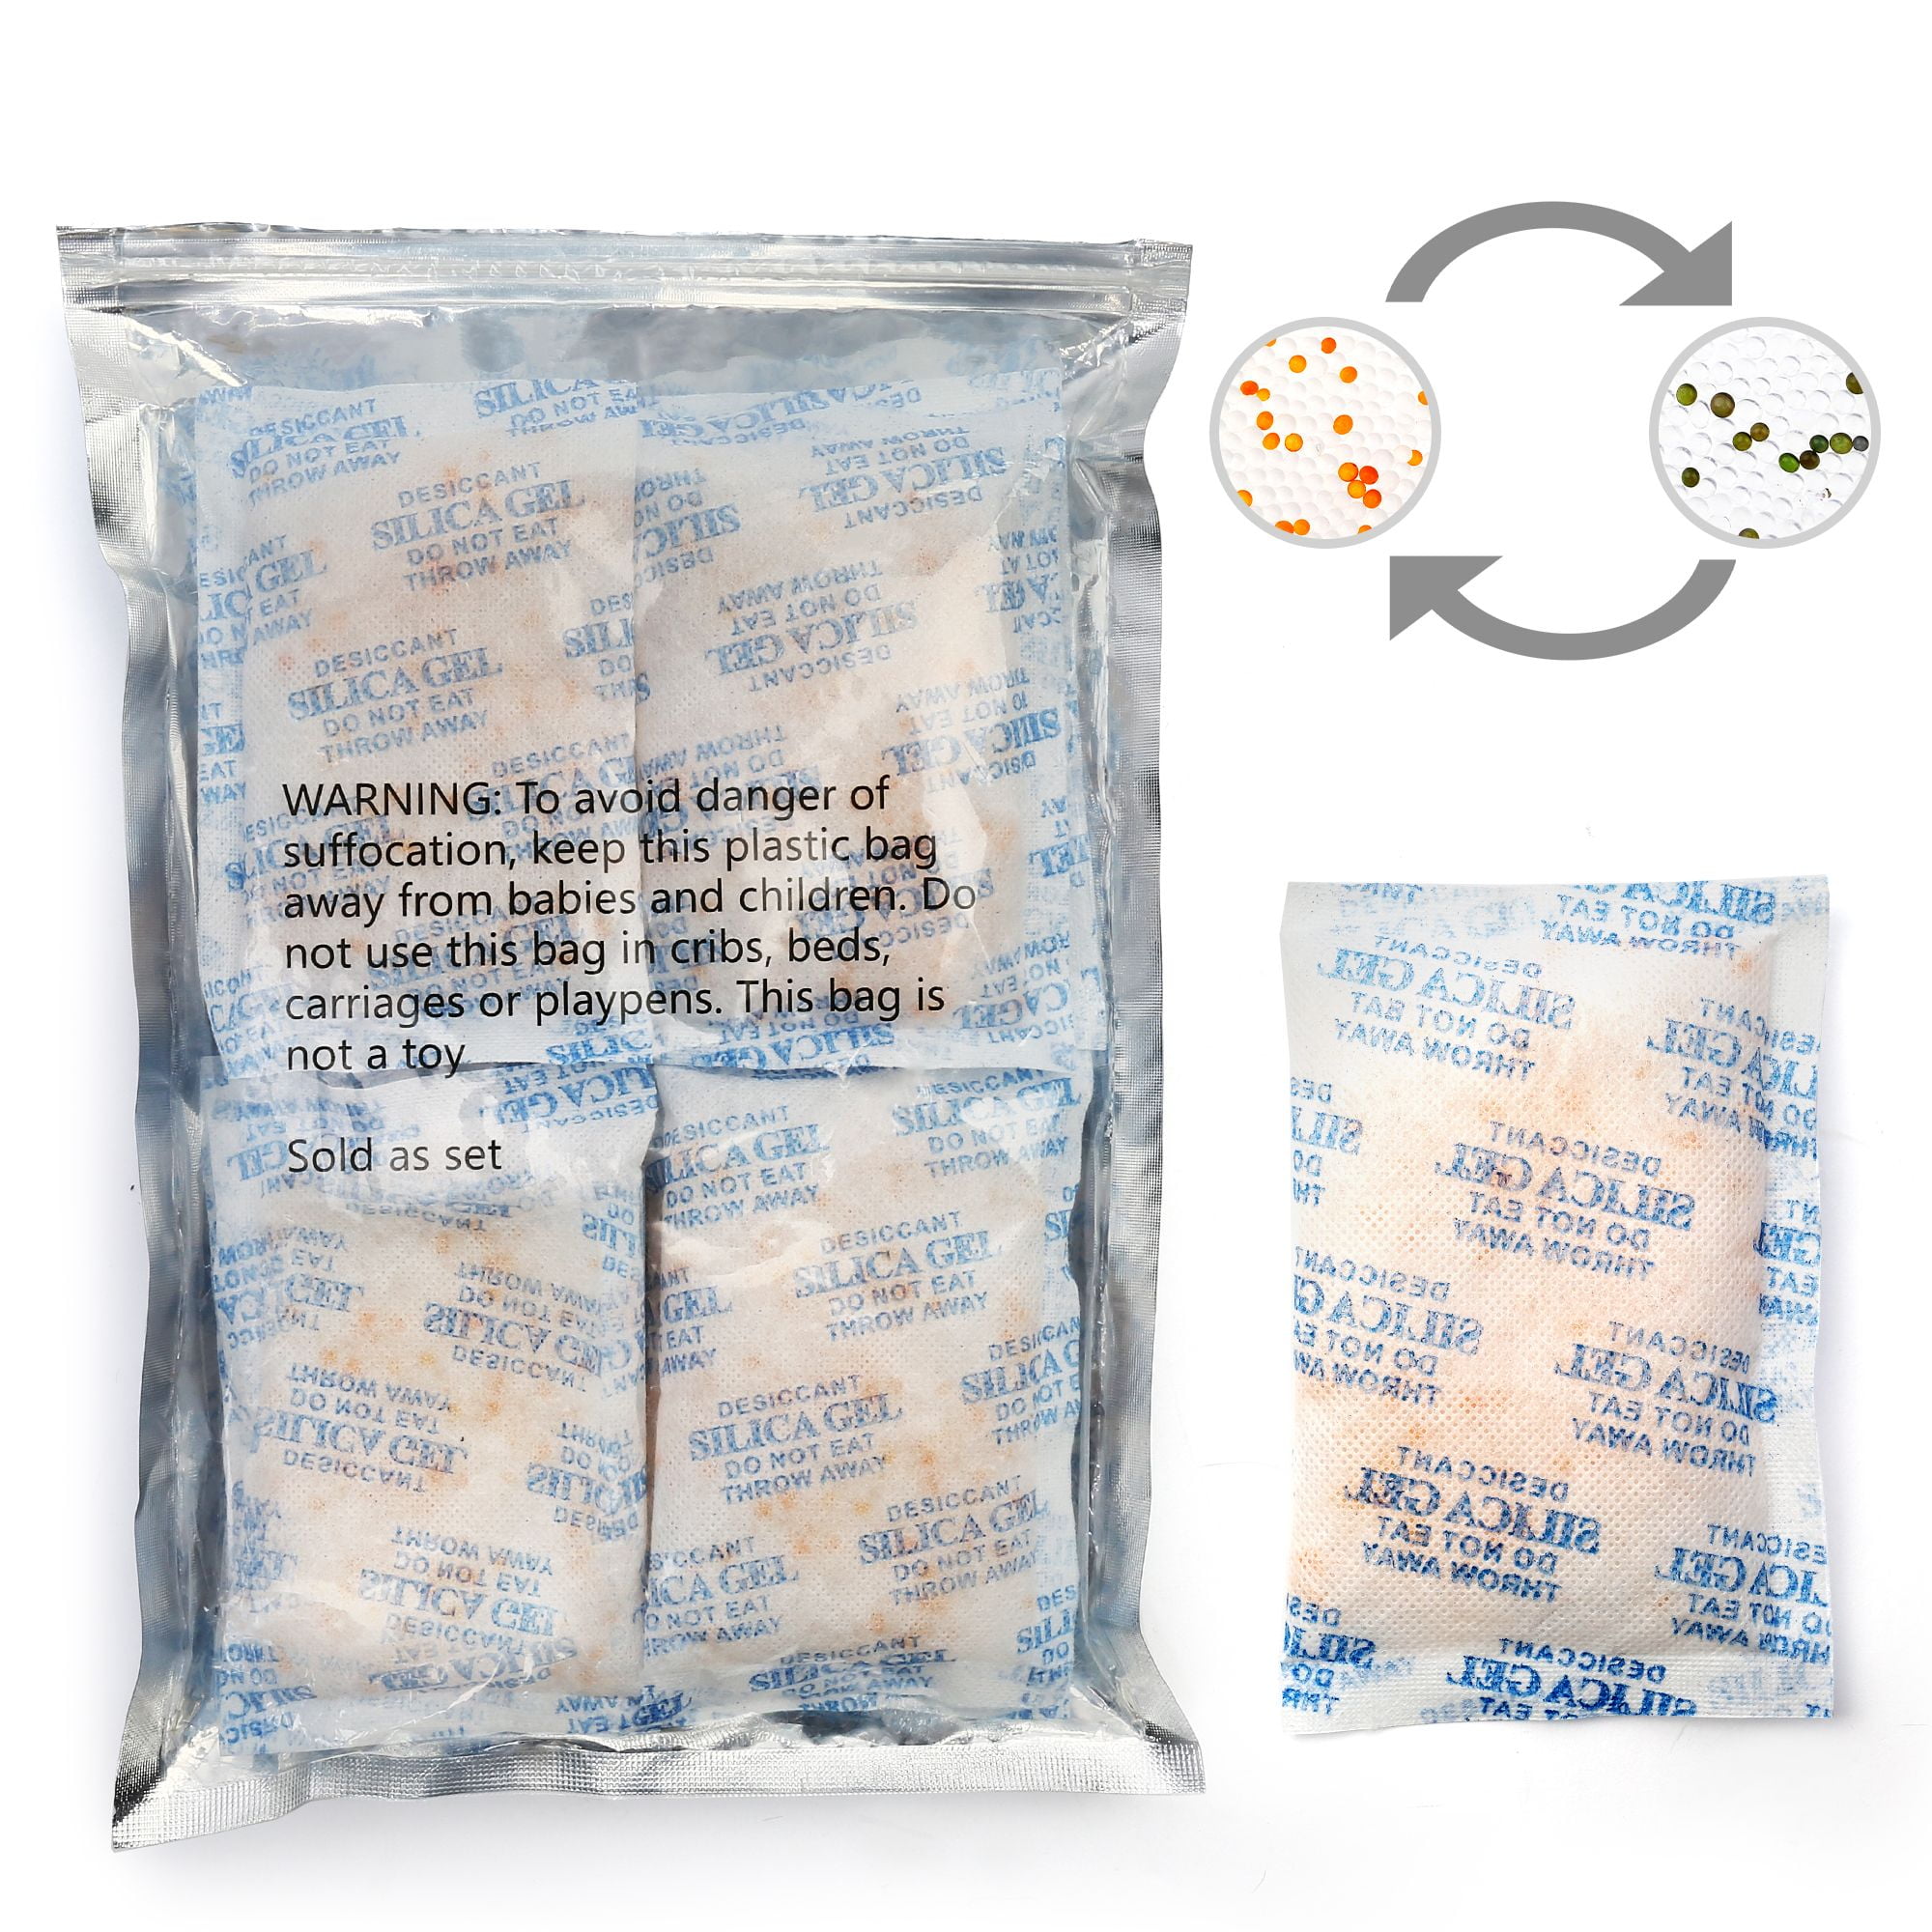 100 Packets 3 g Grams Silica Gel Desiccant Pack Moisture Absorber Ship from USA